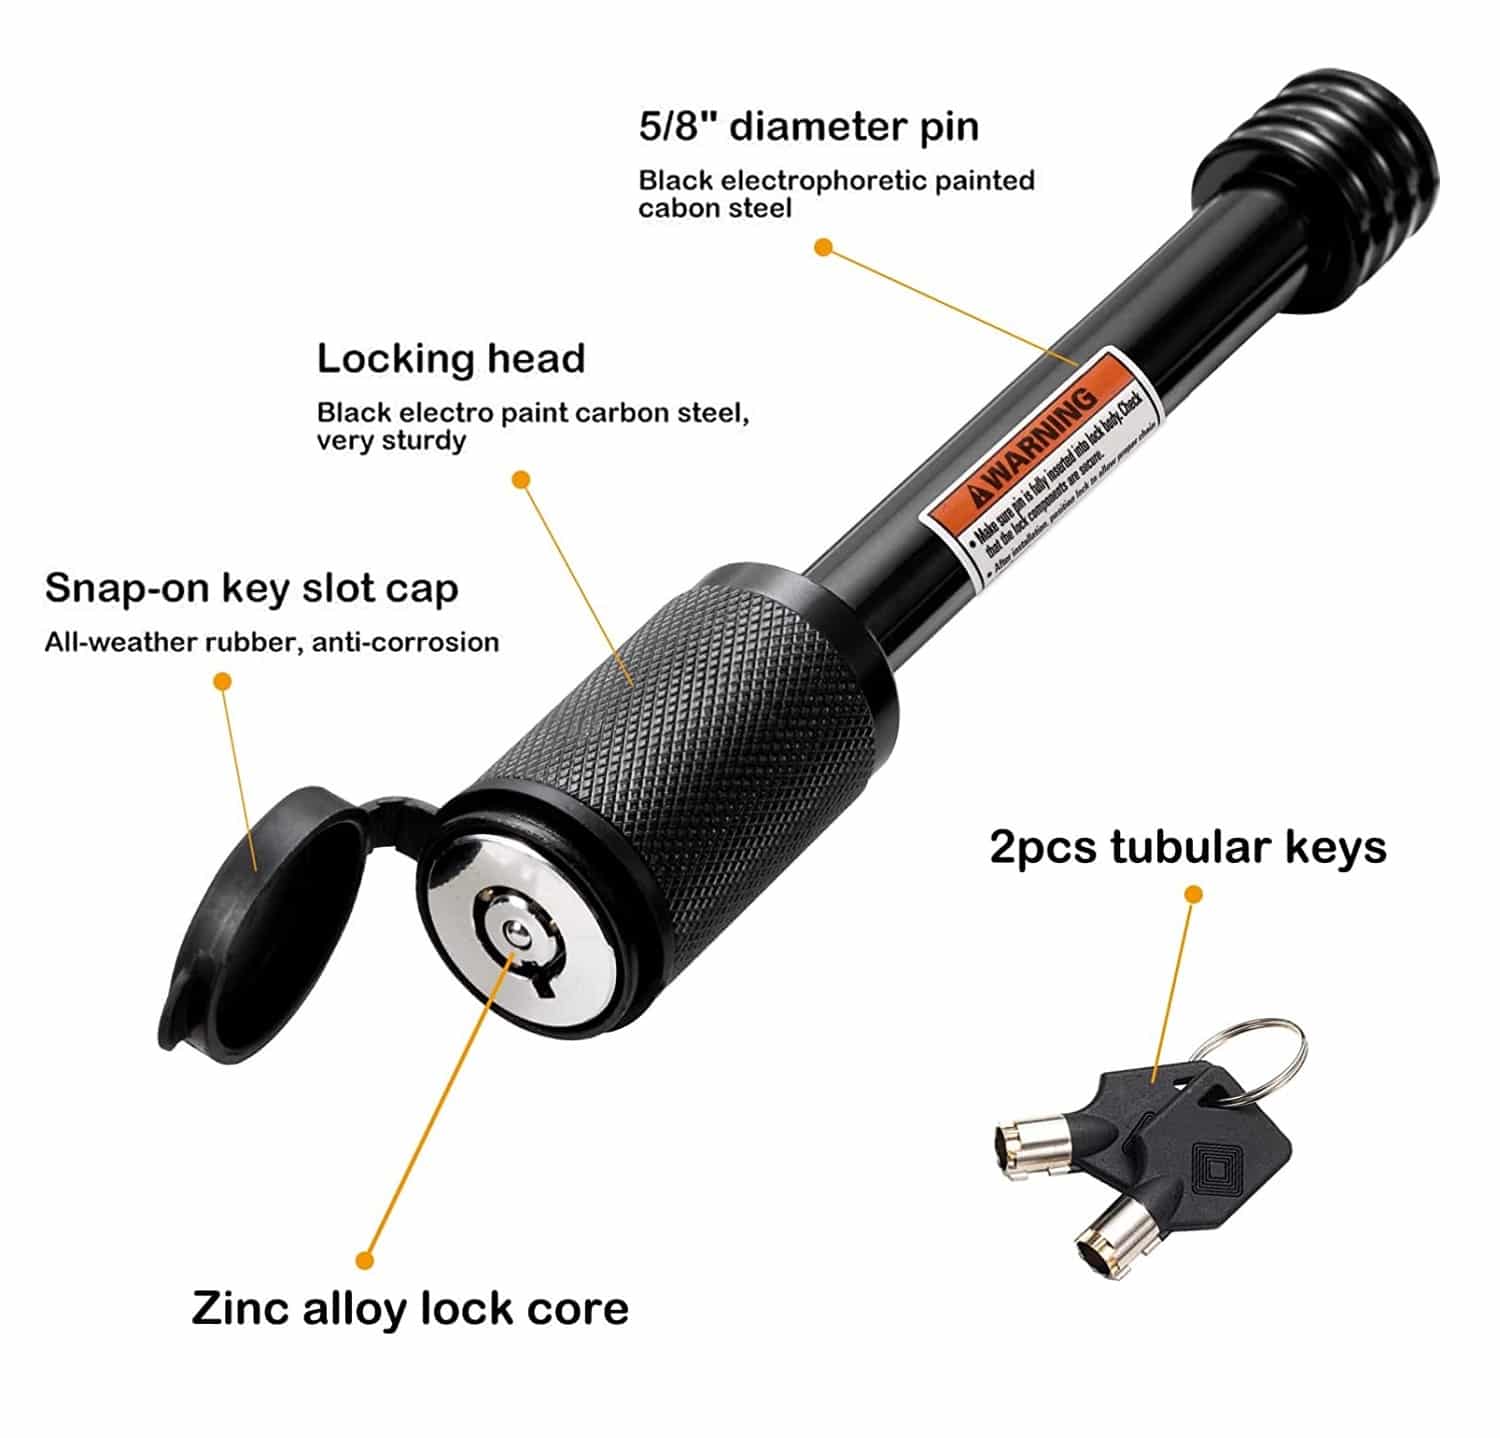 Black Carbon Steel Lock Features and Specs